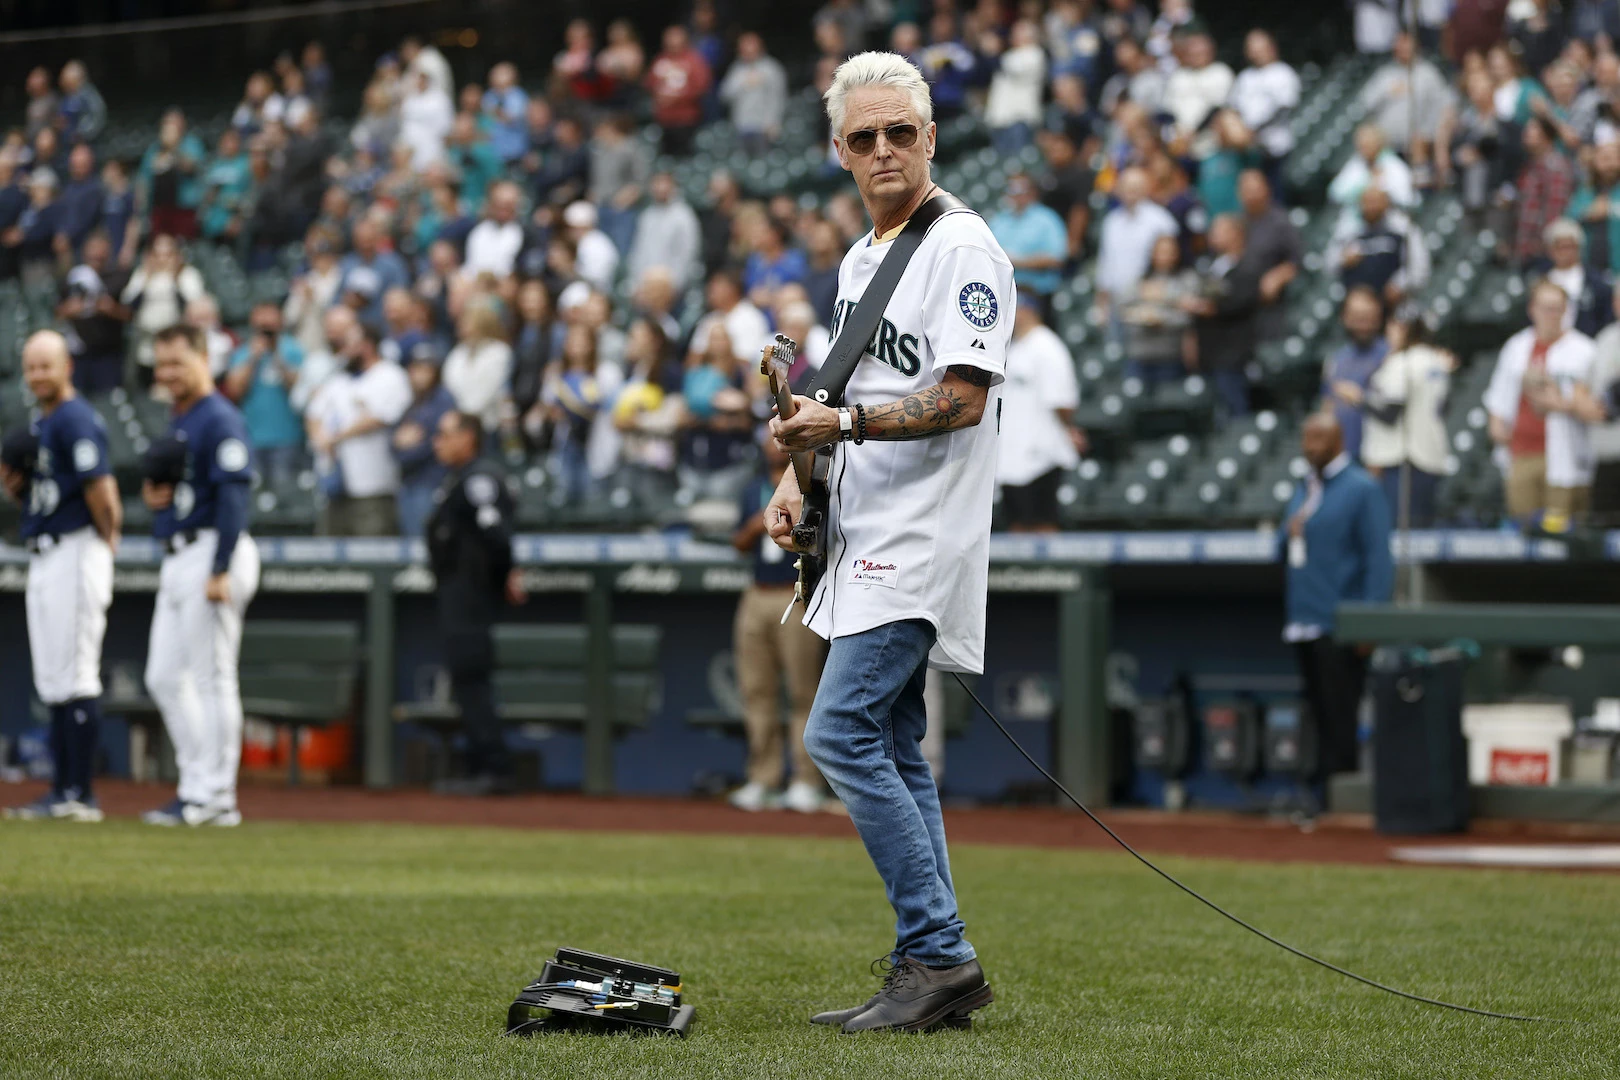 Mike McCready of the rock band Pearl Jam plays the National Anthem